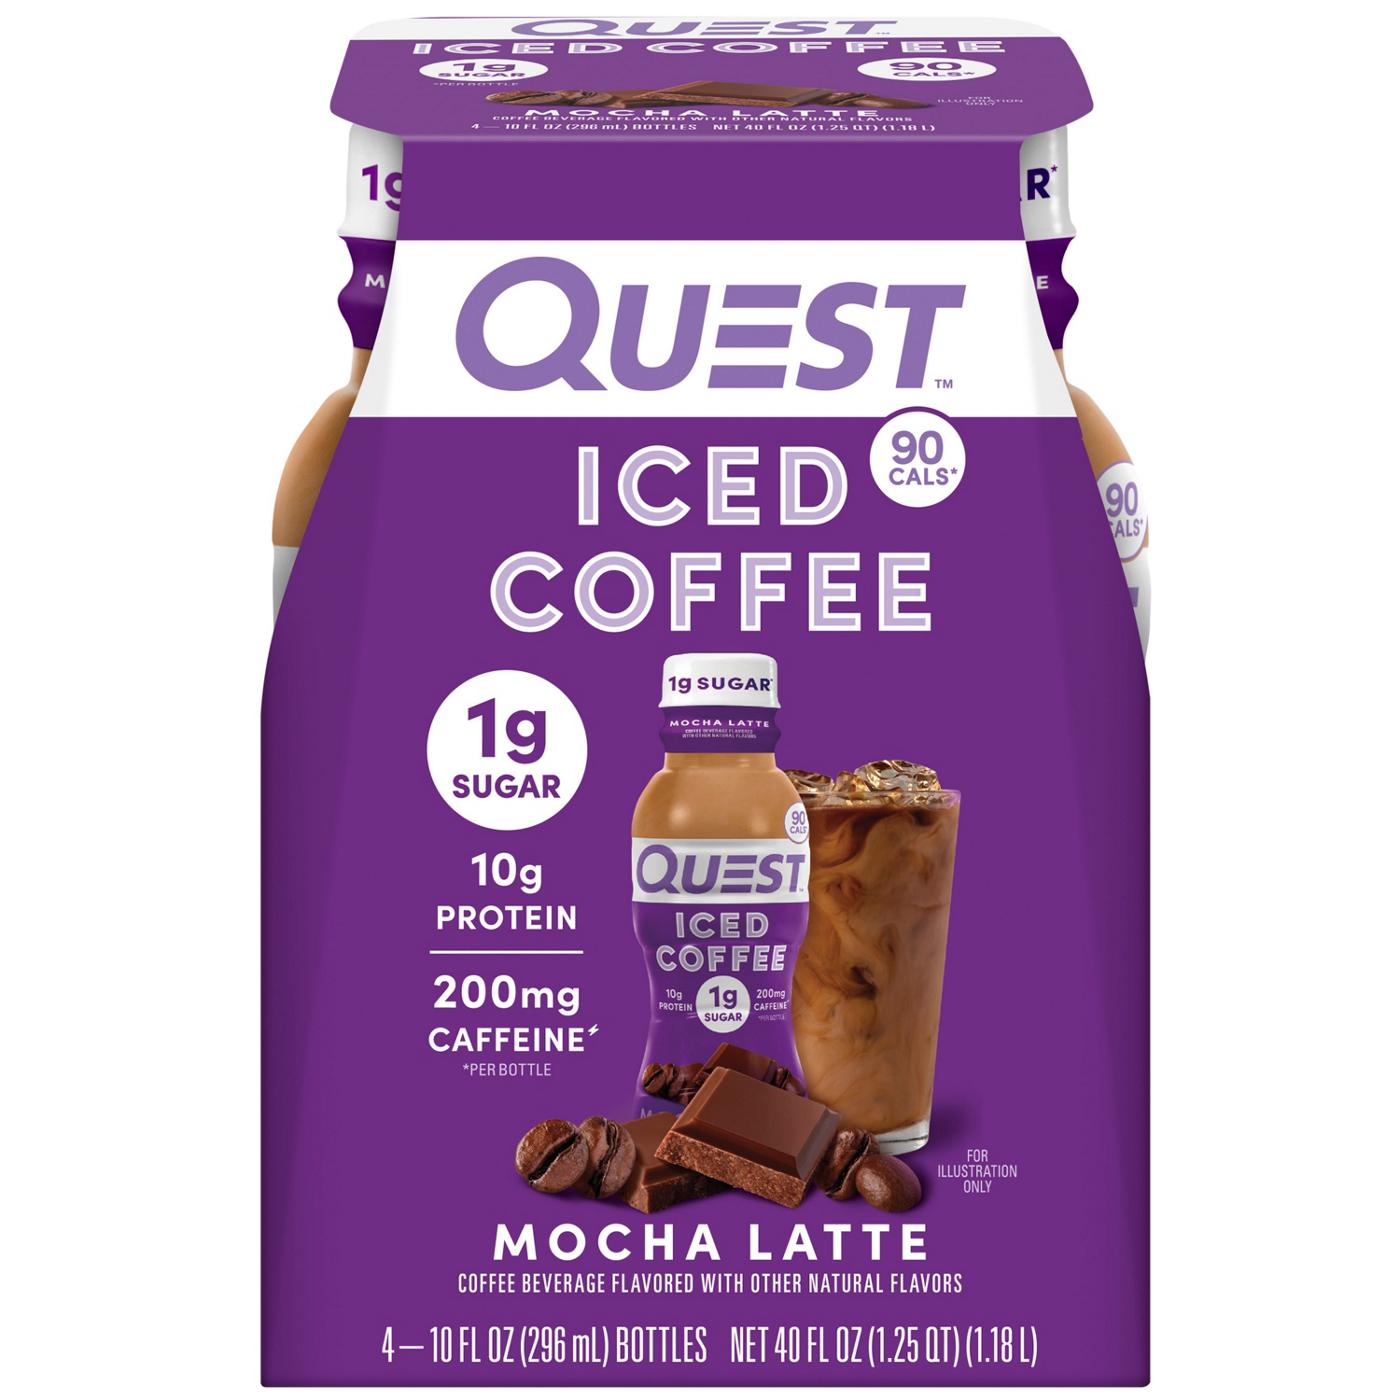 Quest  Iced Coffee Protein Drink  - Mocha Latte; image 1 of 2